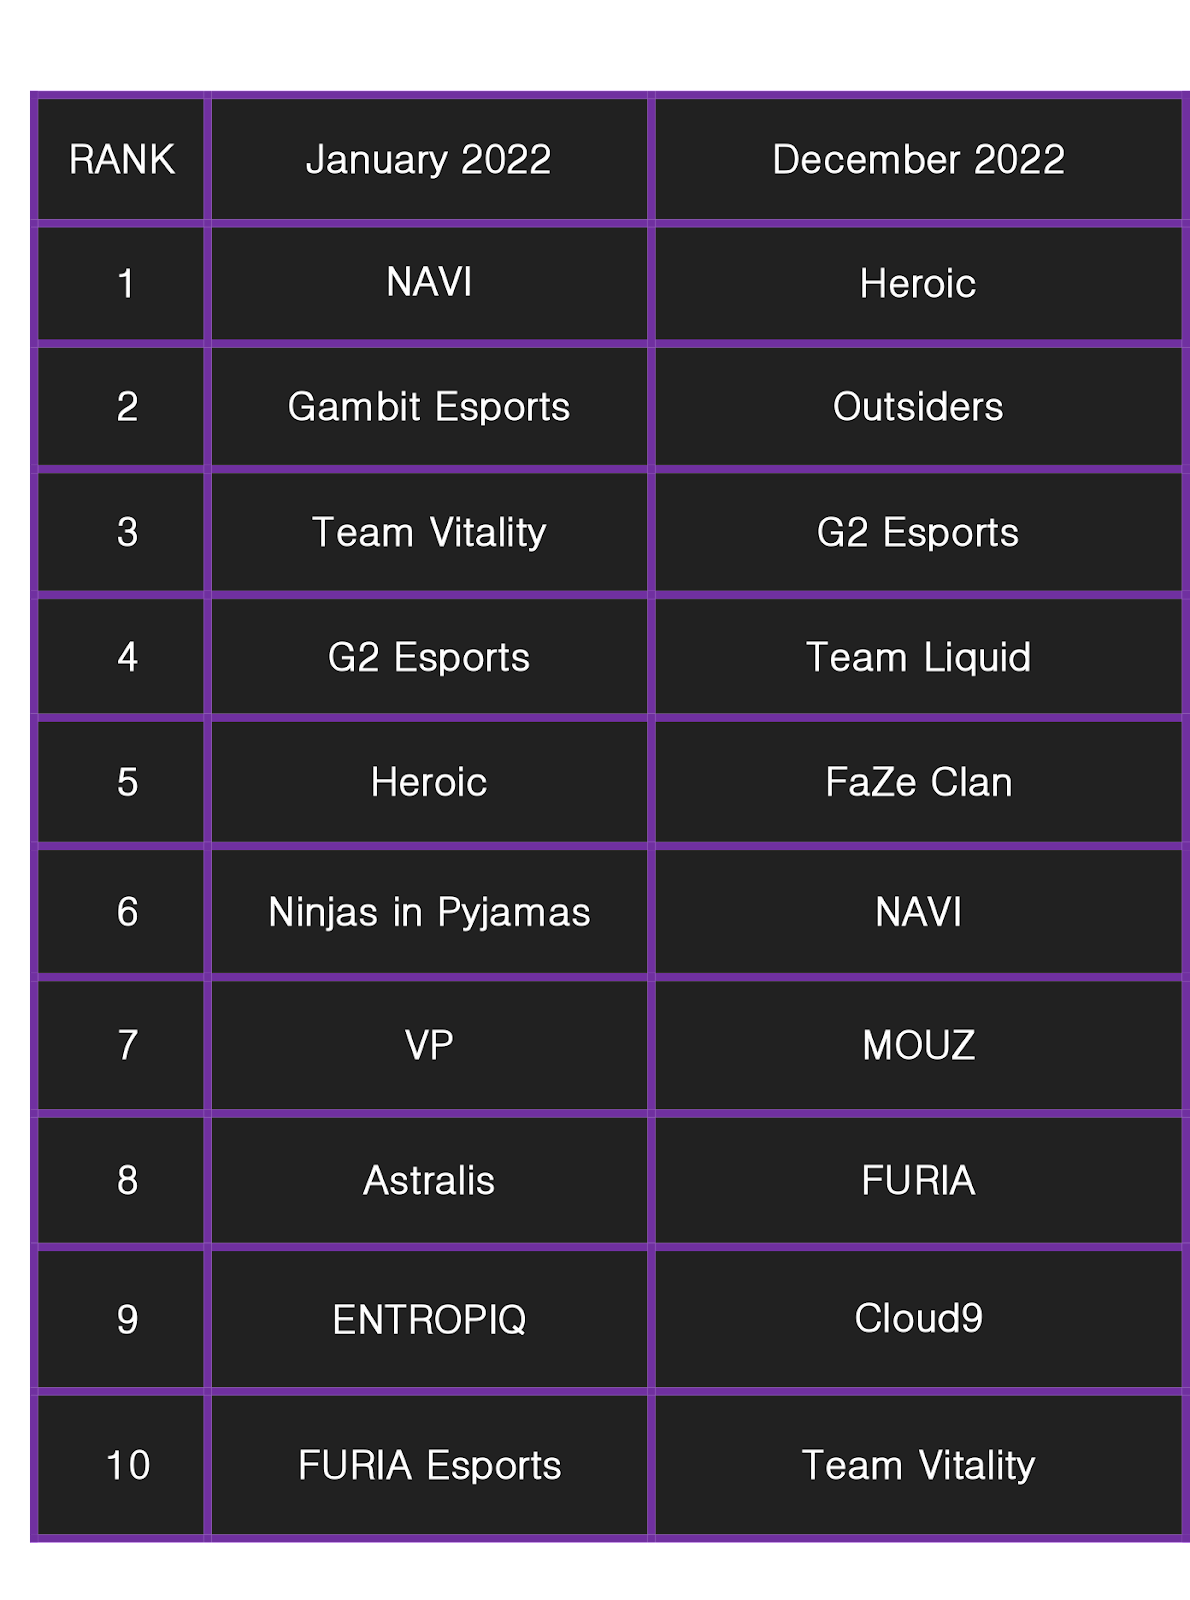 The standings for the top CS:GO teams in both January 2022 and February 2022 showing the fall of NAVI and the rise of teams such as Heroic and MOUZ.